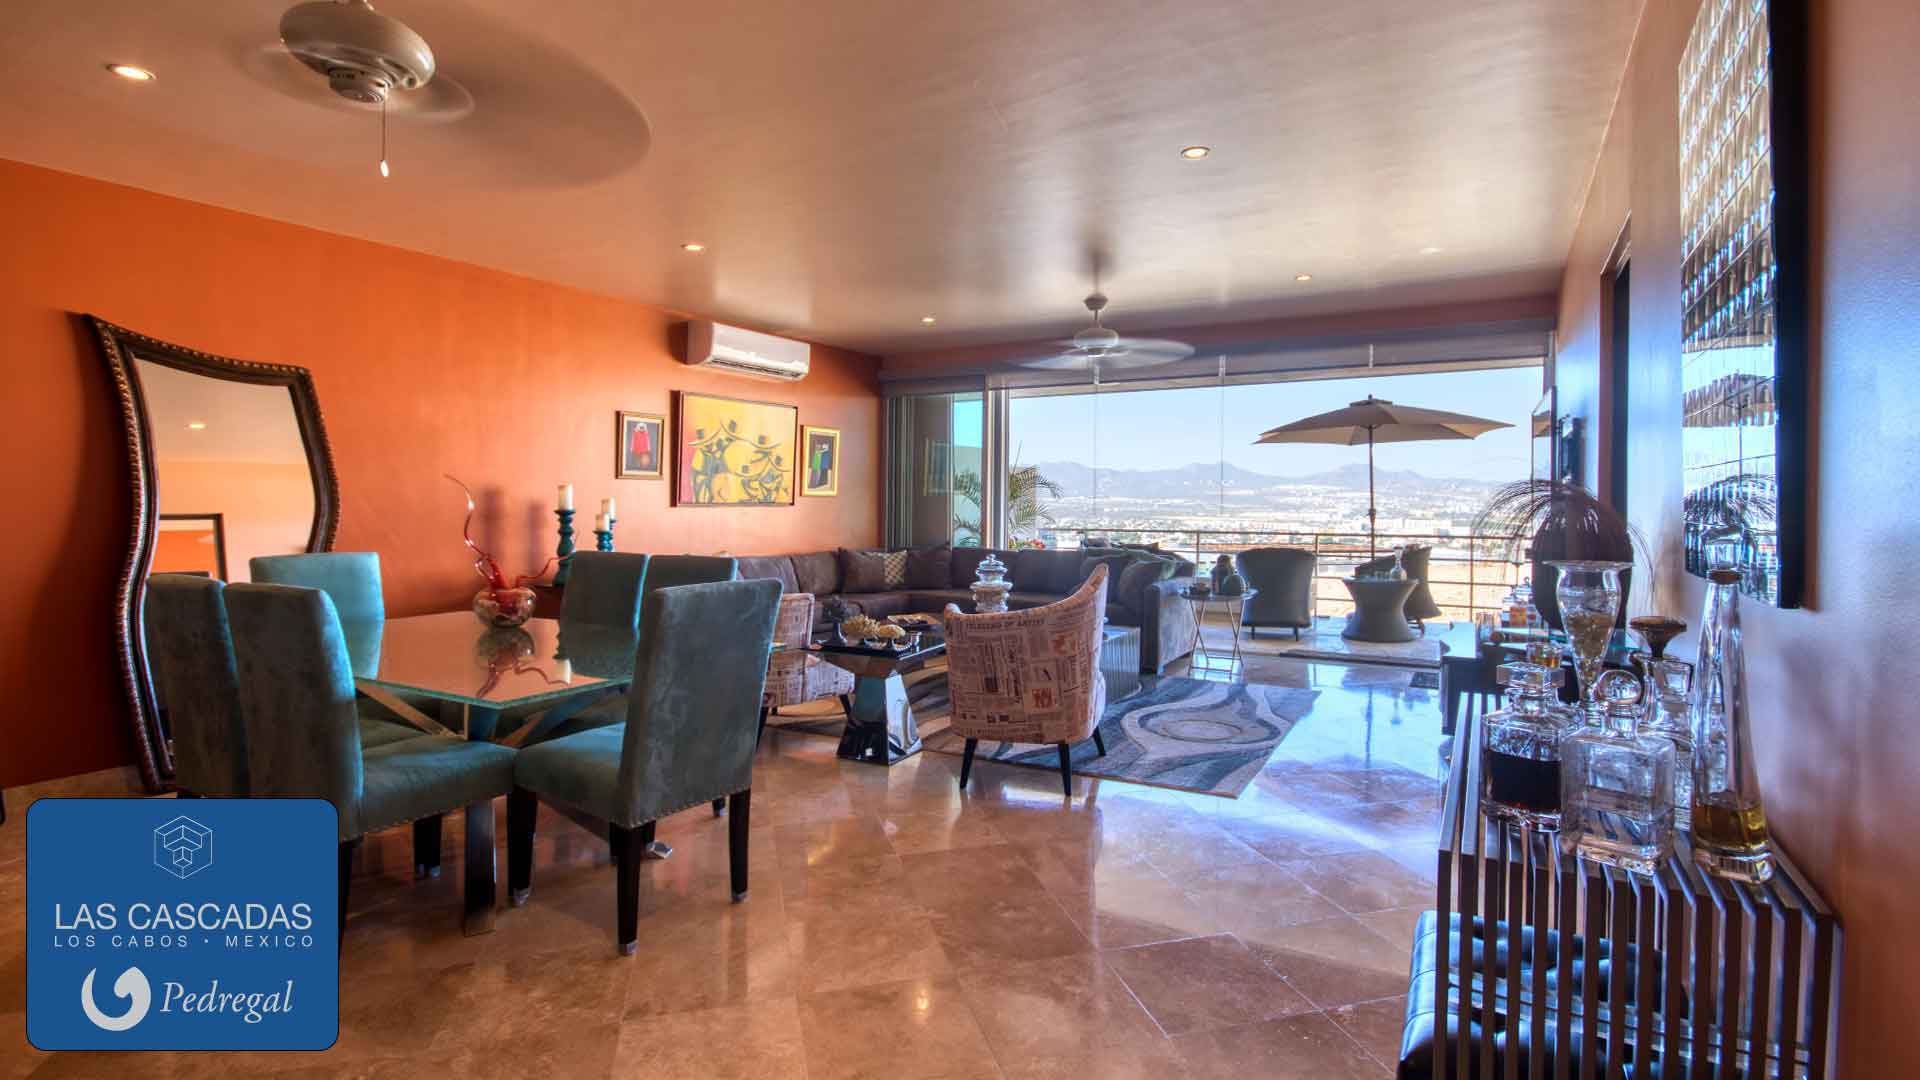 Furnished condo for sale in Cabo, Pedregal